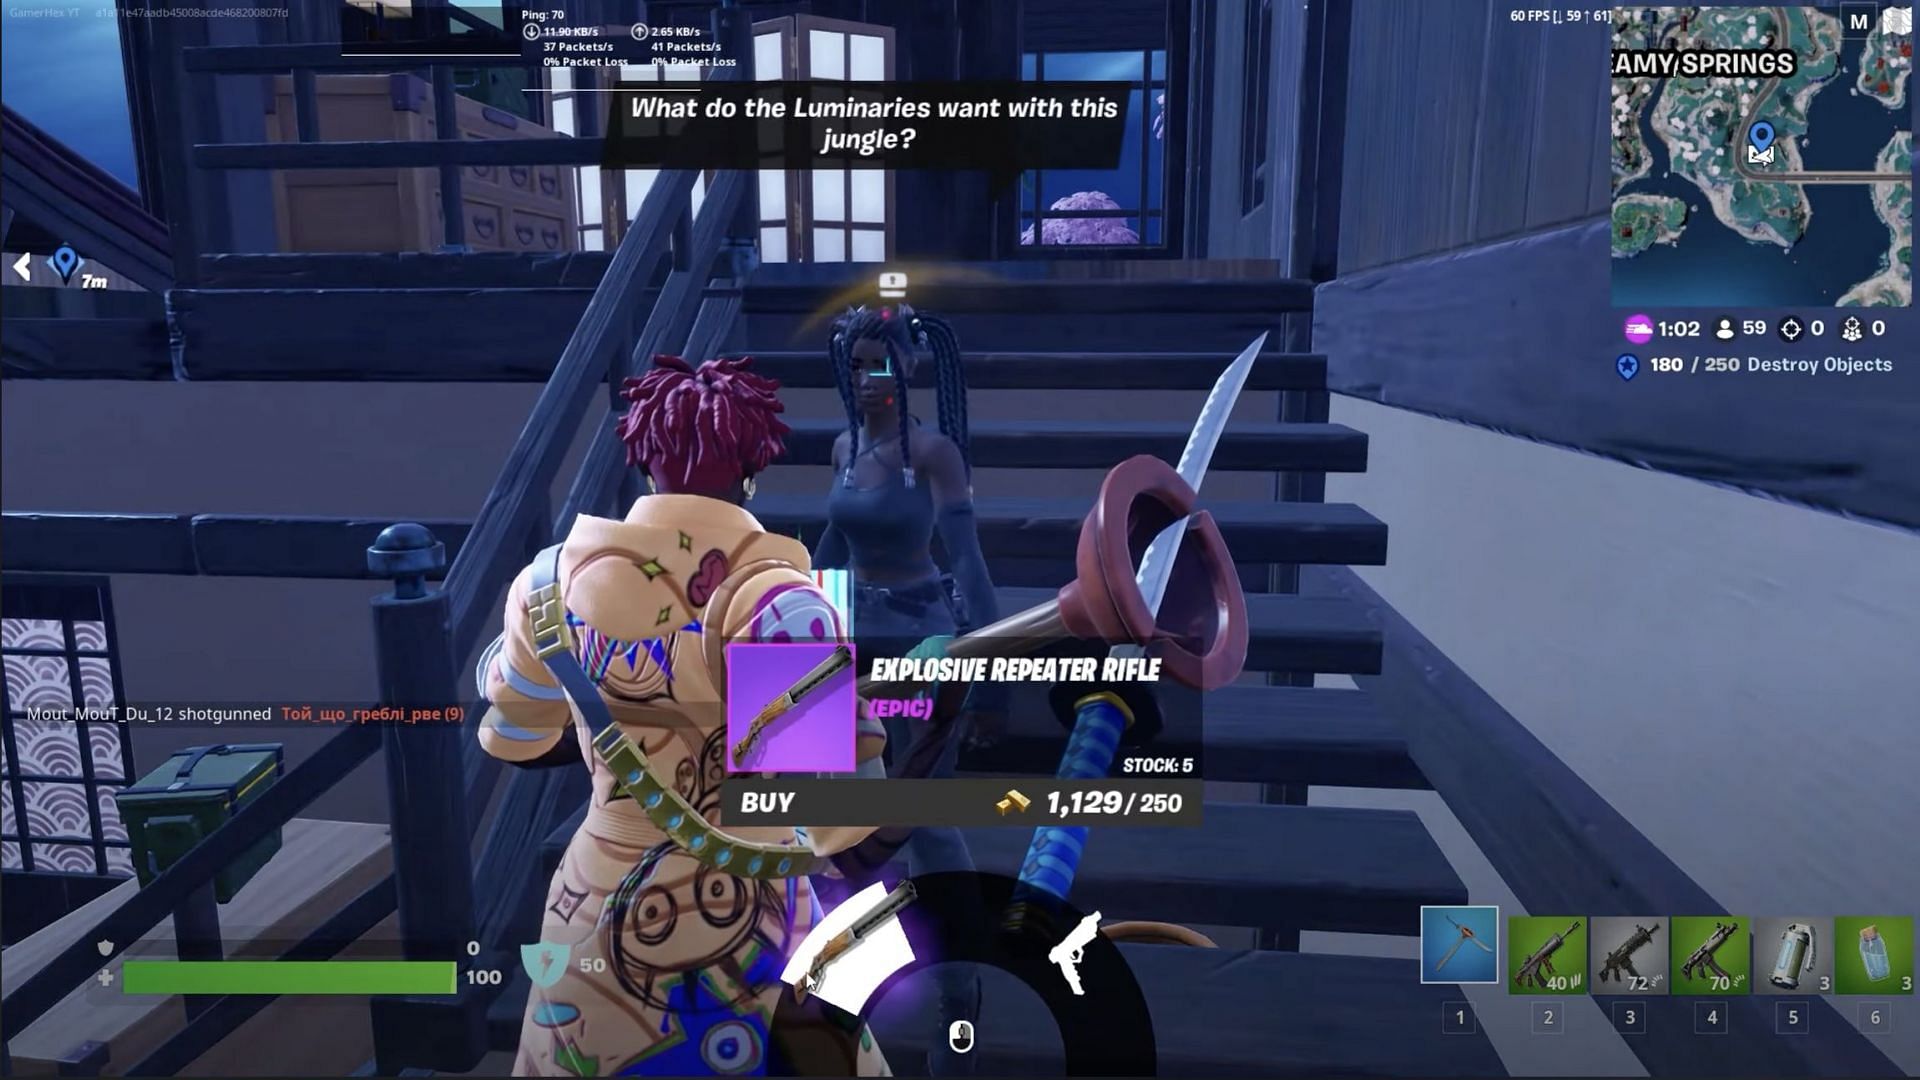 Buy the weapon from the NPC in their wheel (Image via Fortnite Events on YouTube)